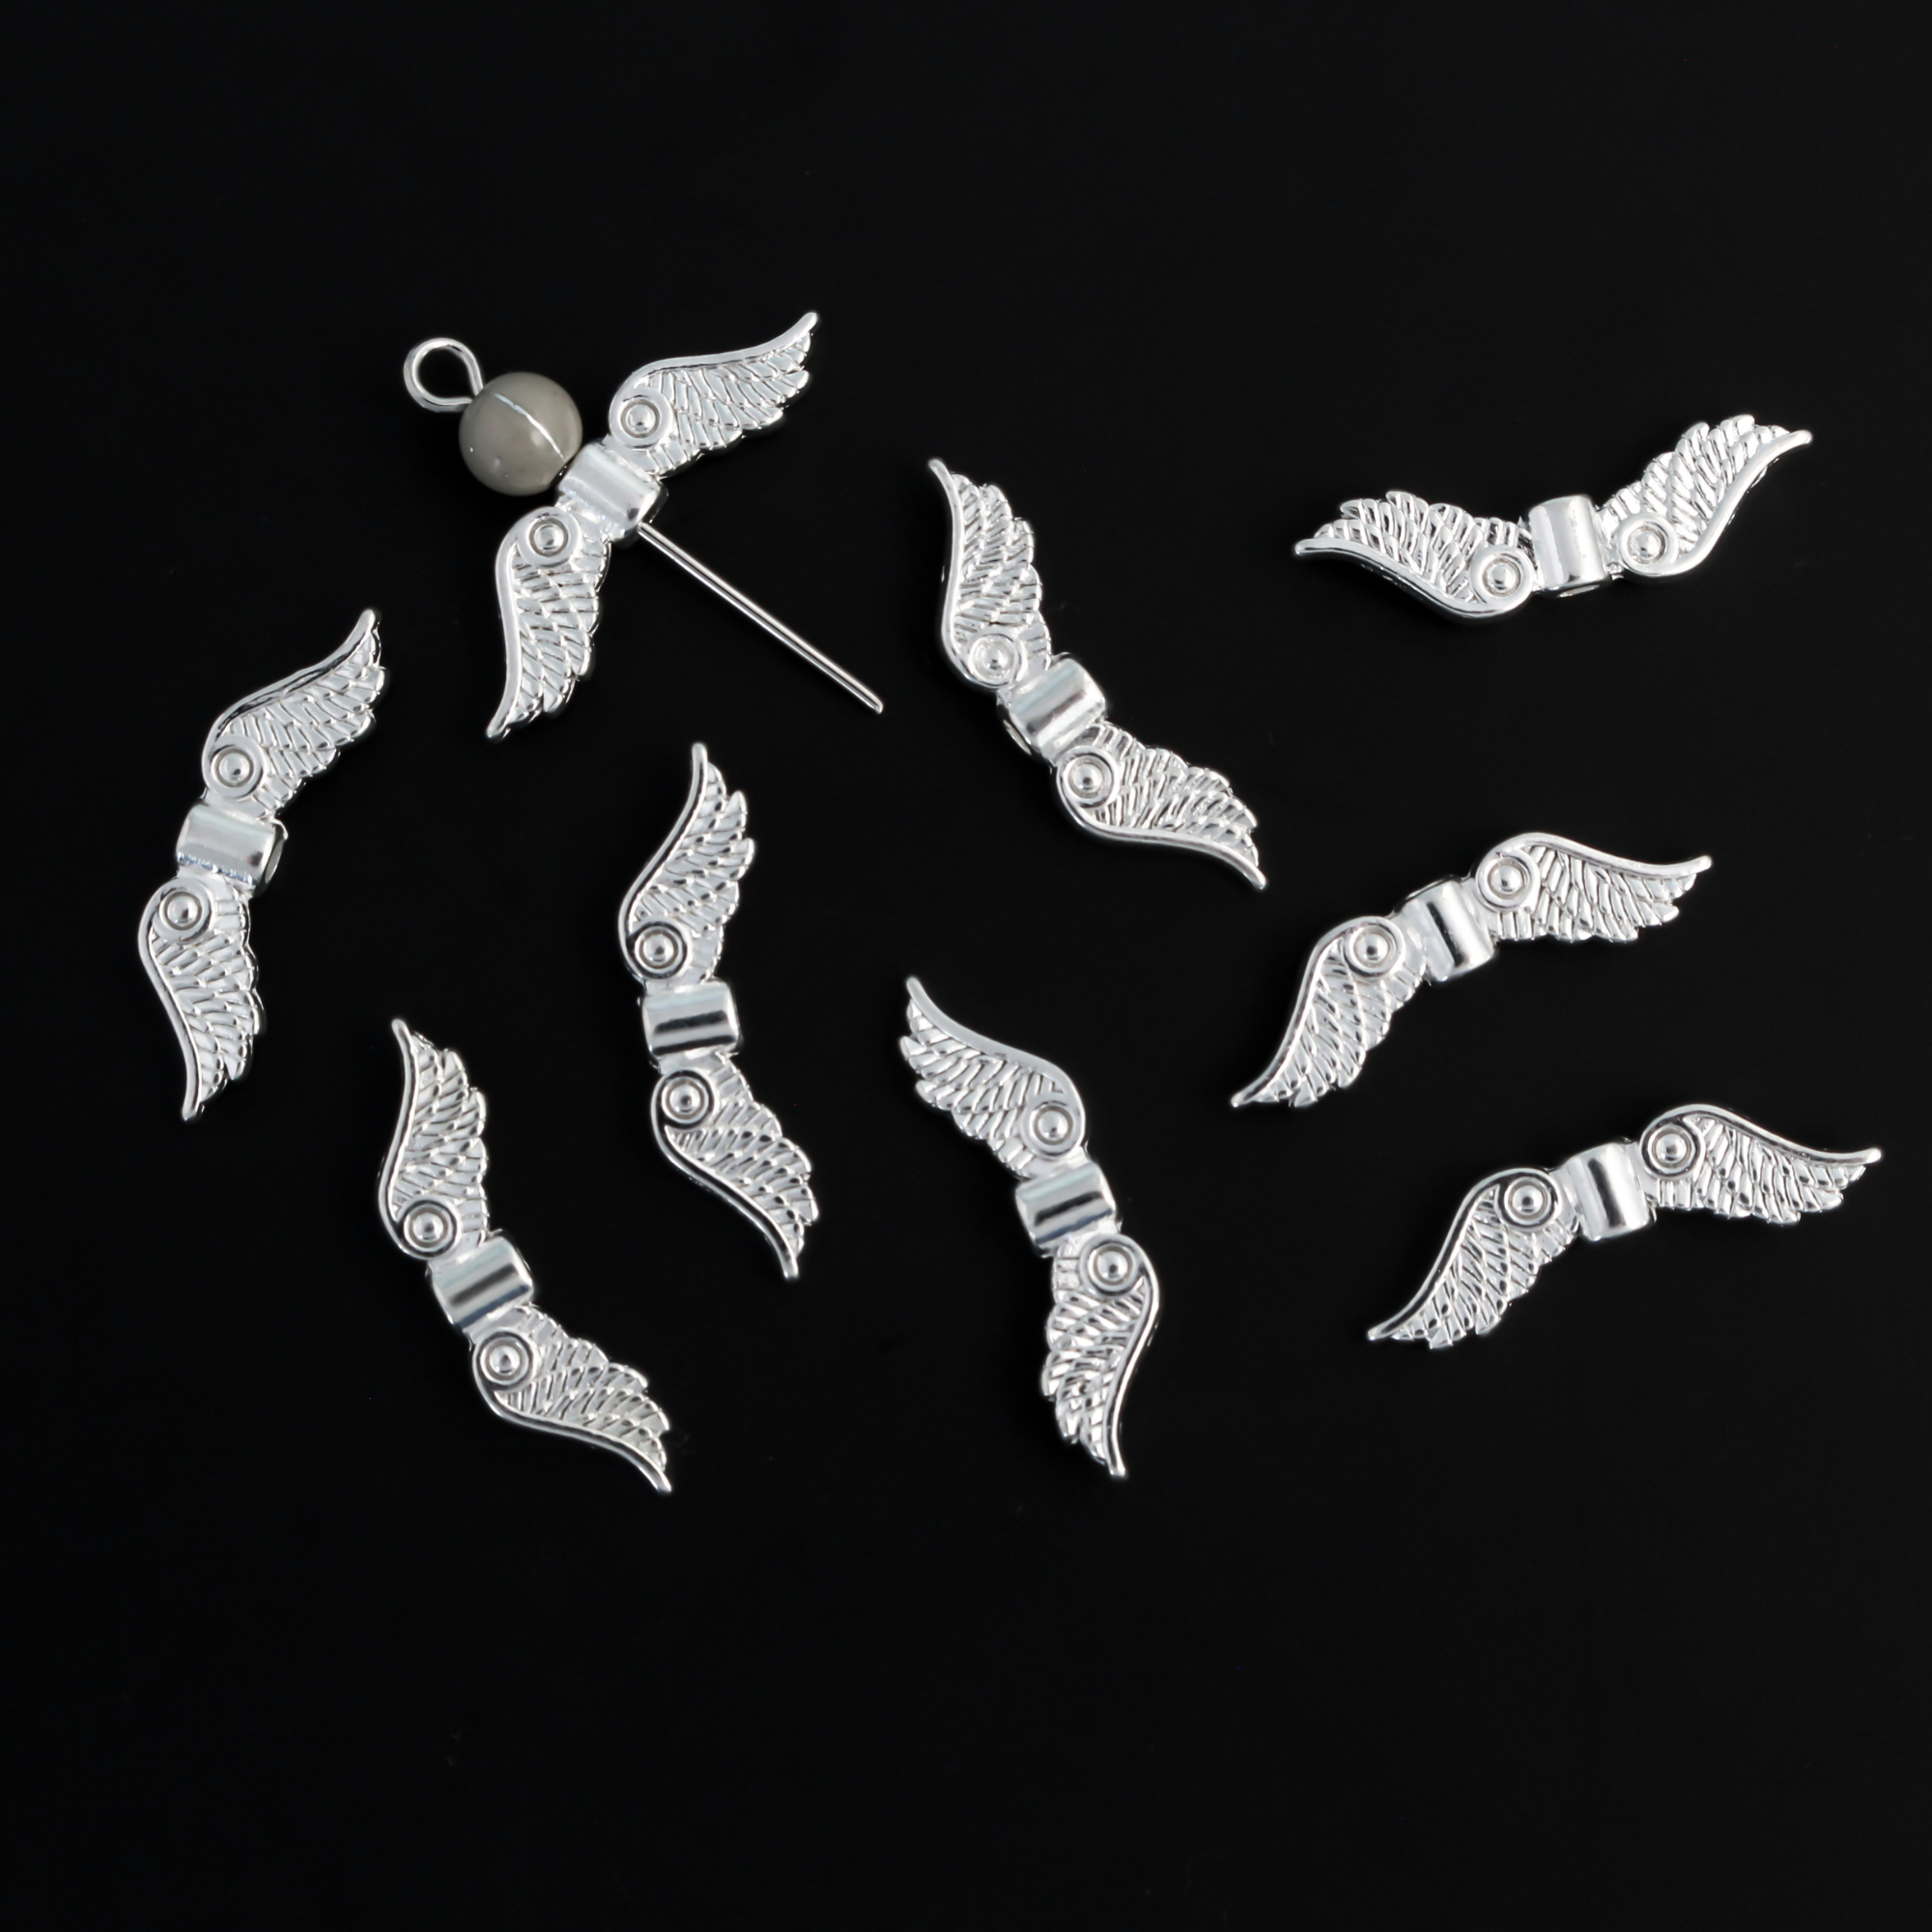 Angel Wing Spacer Beads - Guardian Angel Wing Charms in Platinum Silver, 30pcs